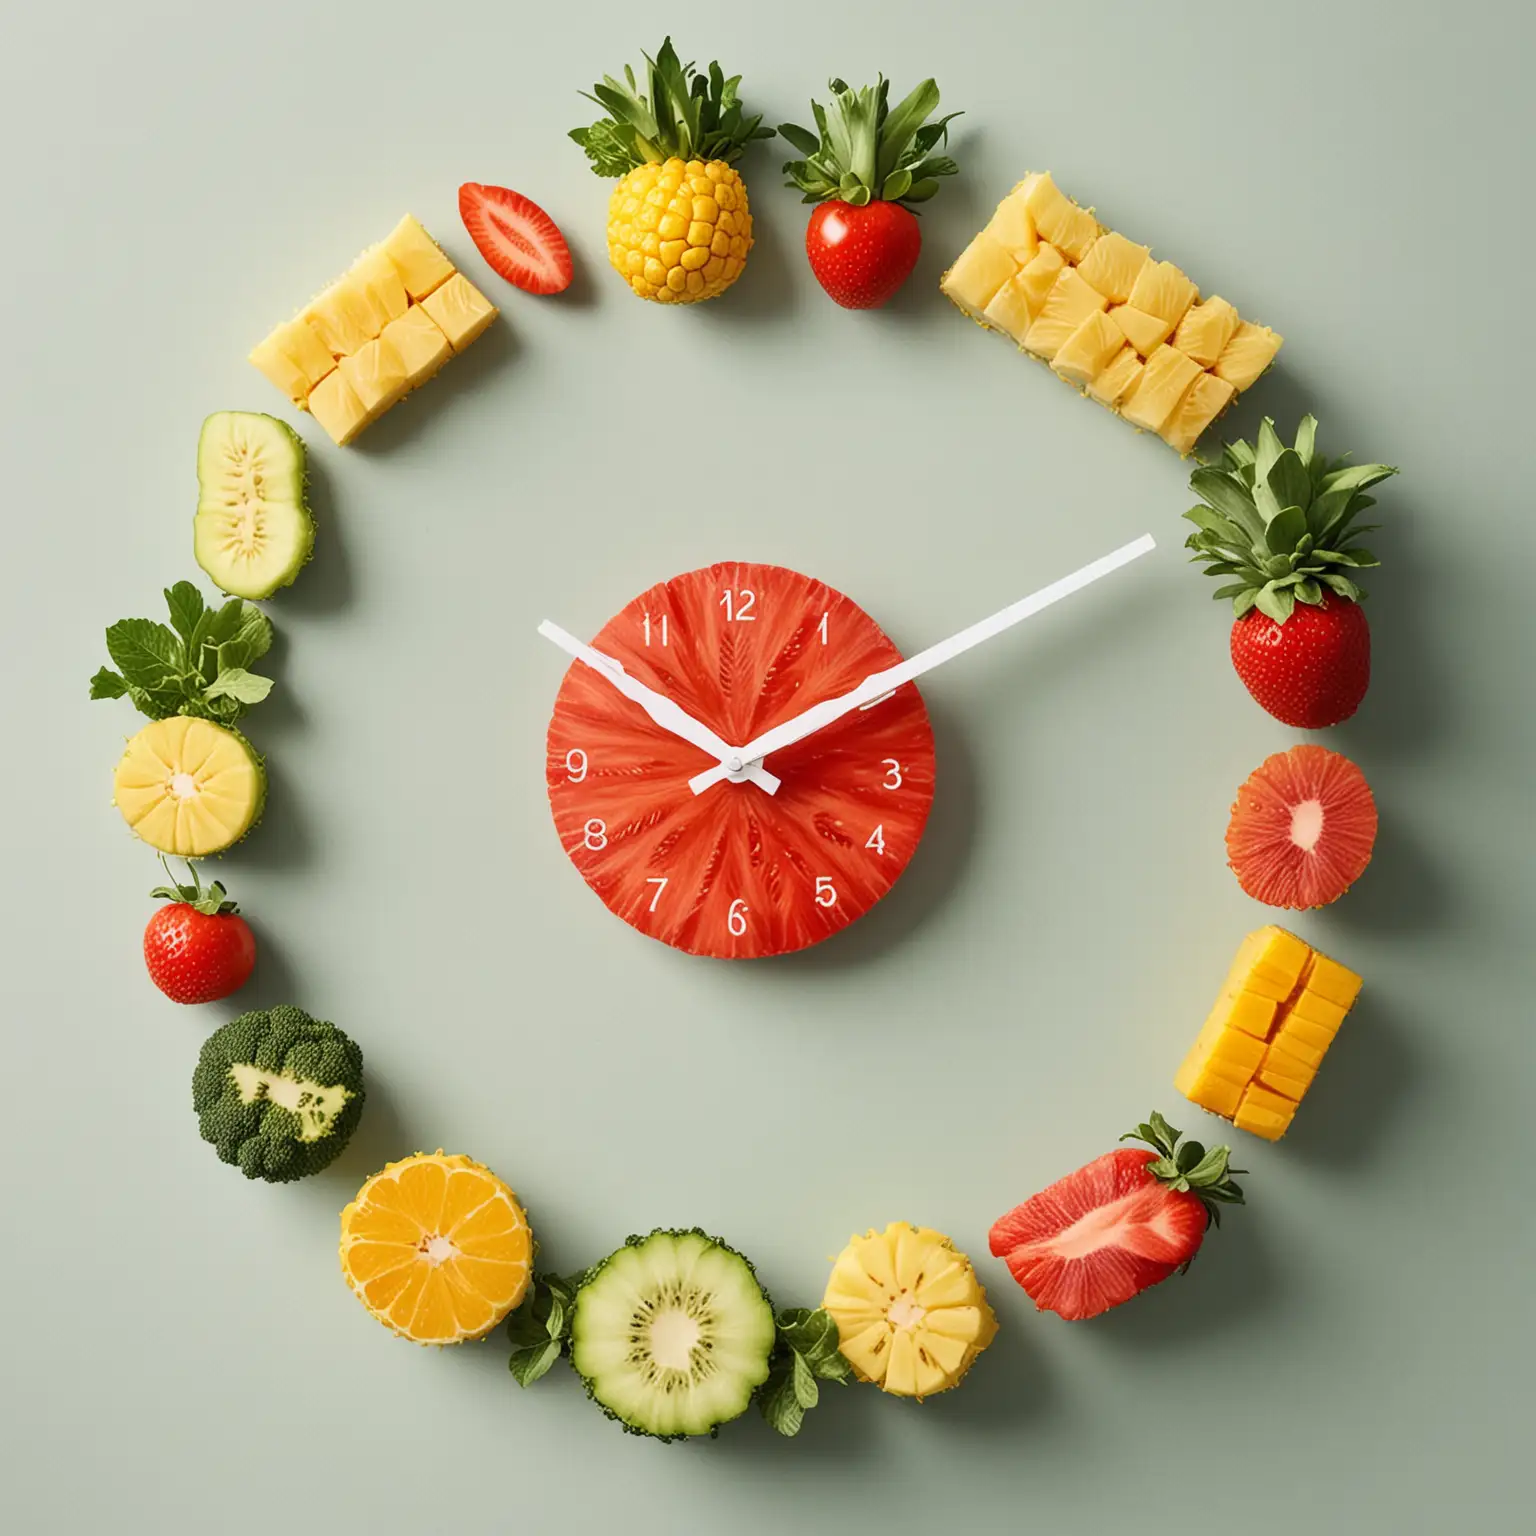 Colorful Fruit and Vegetable Clock Sculpture